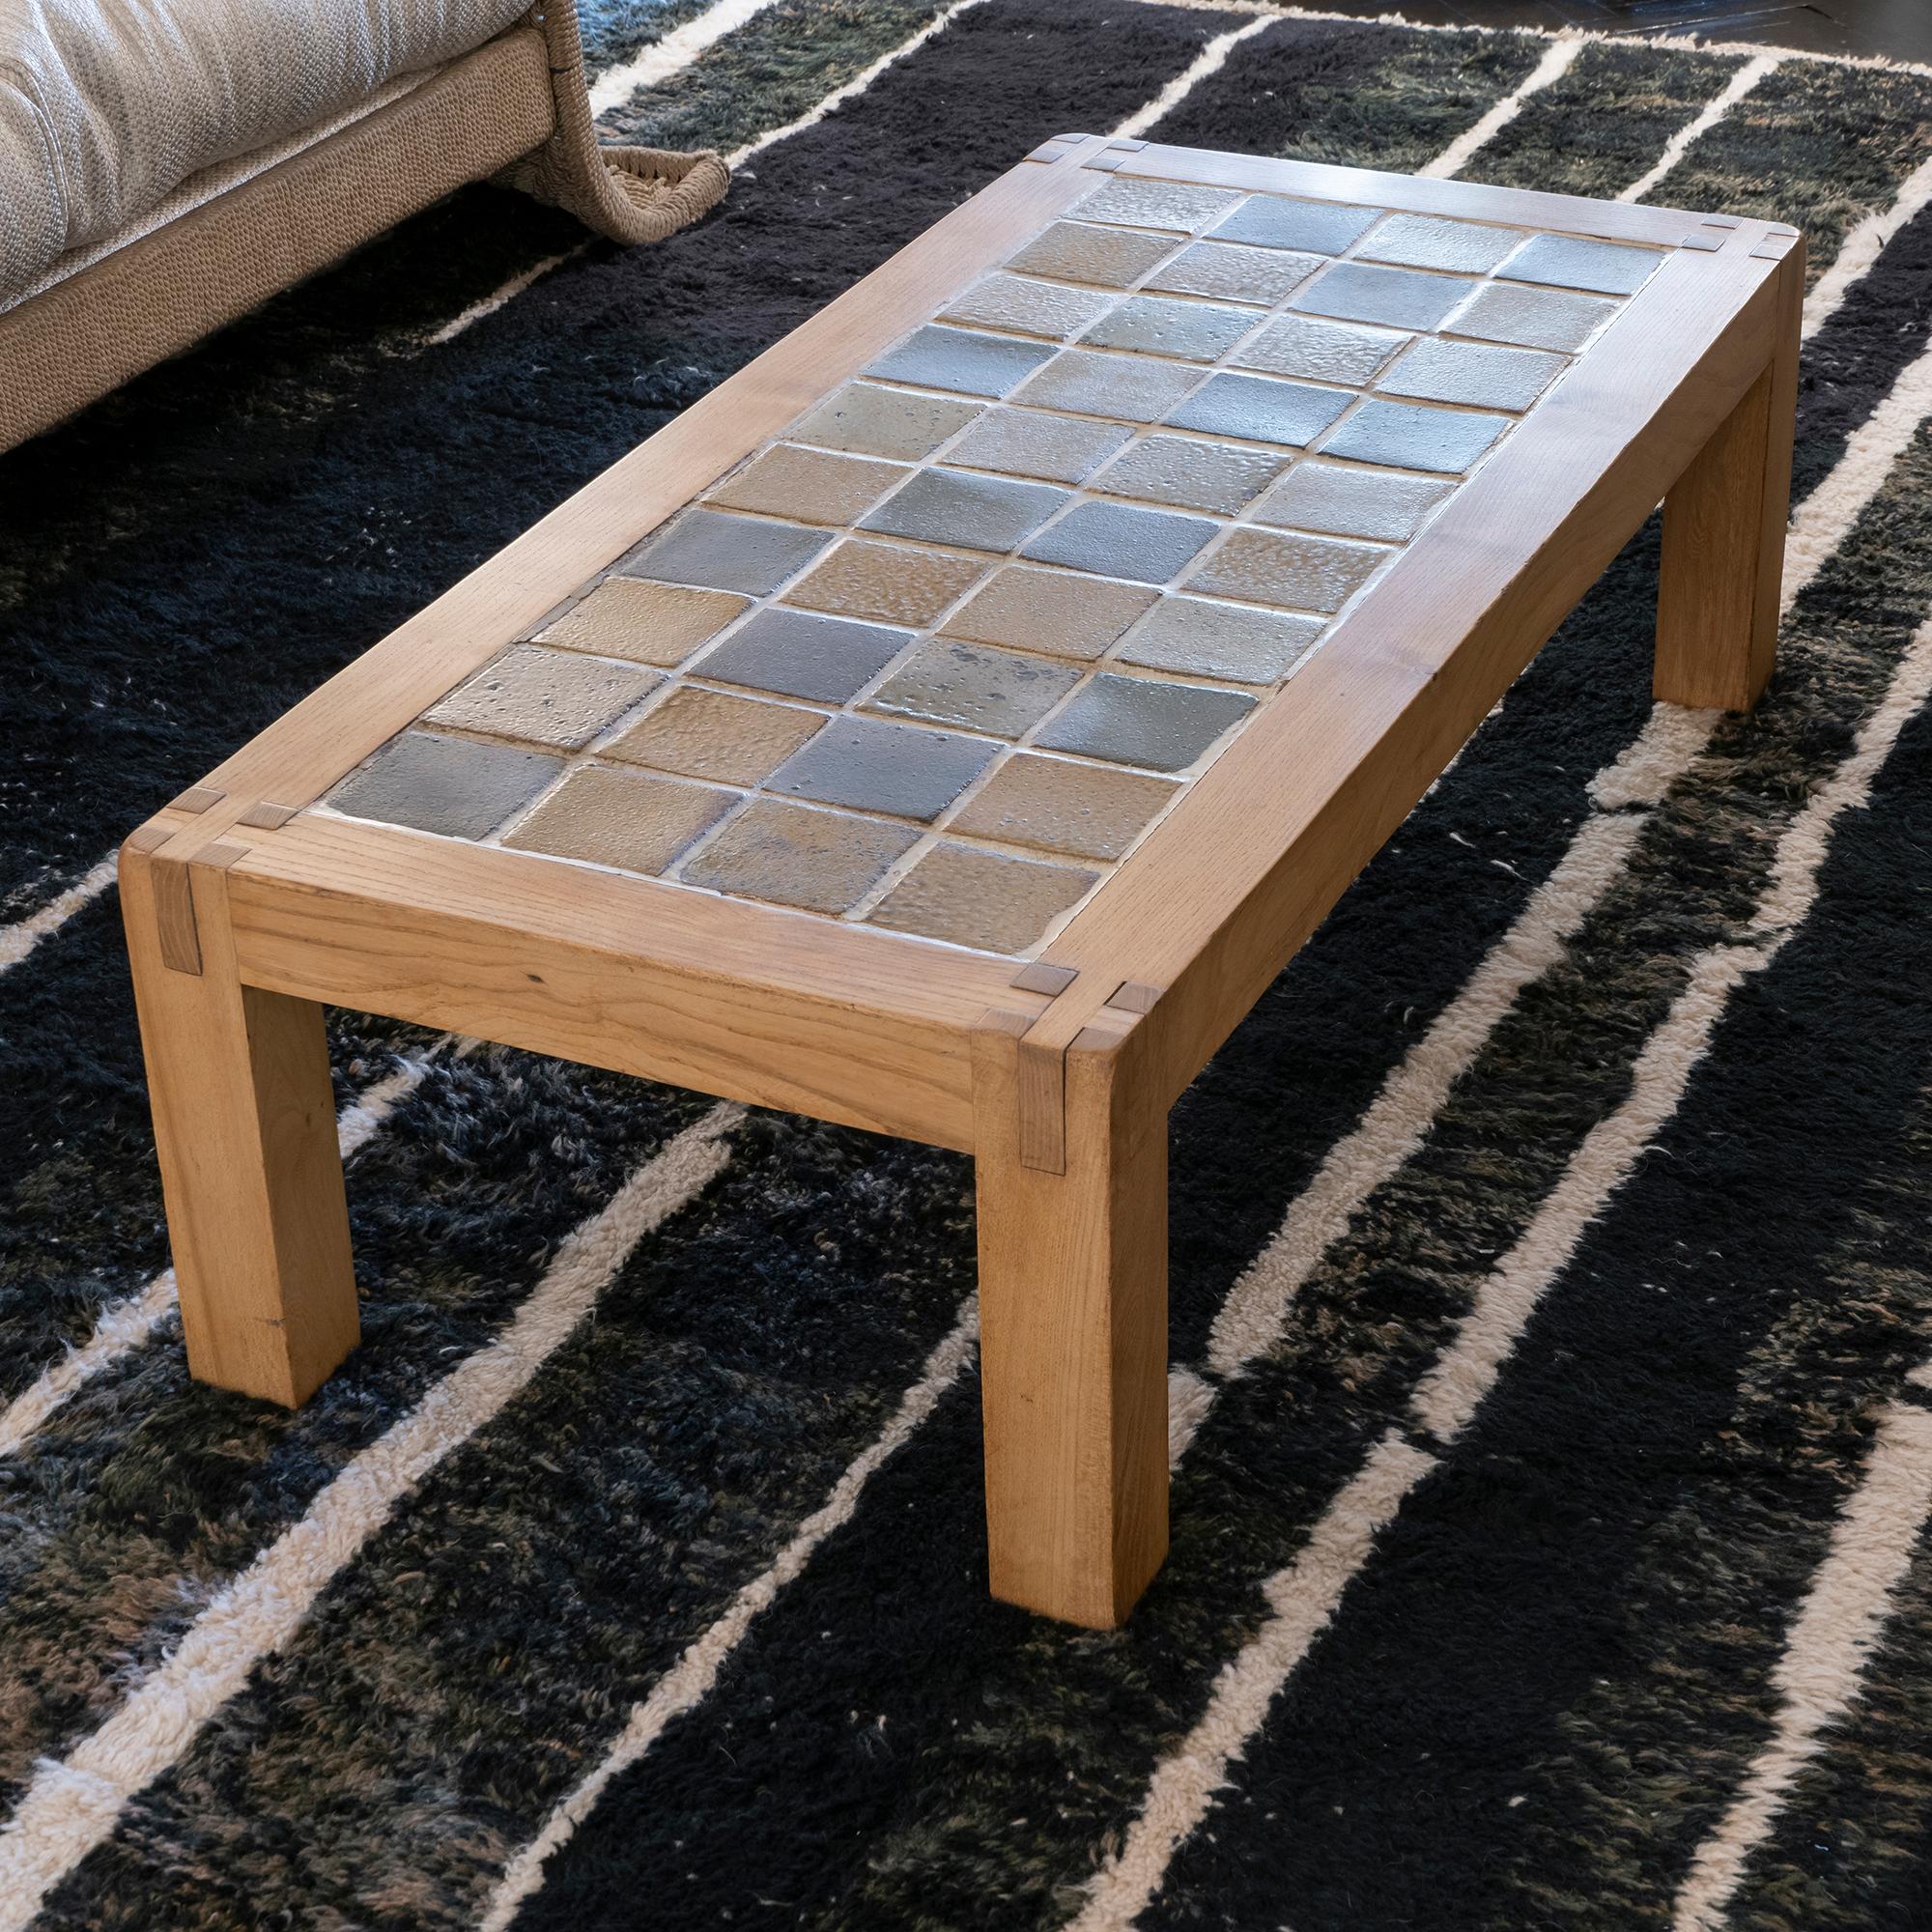 Mid-20th Century French Oak Wood and Multicolor Ceramic Tiles Coffee Table, 1960's Circa